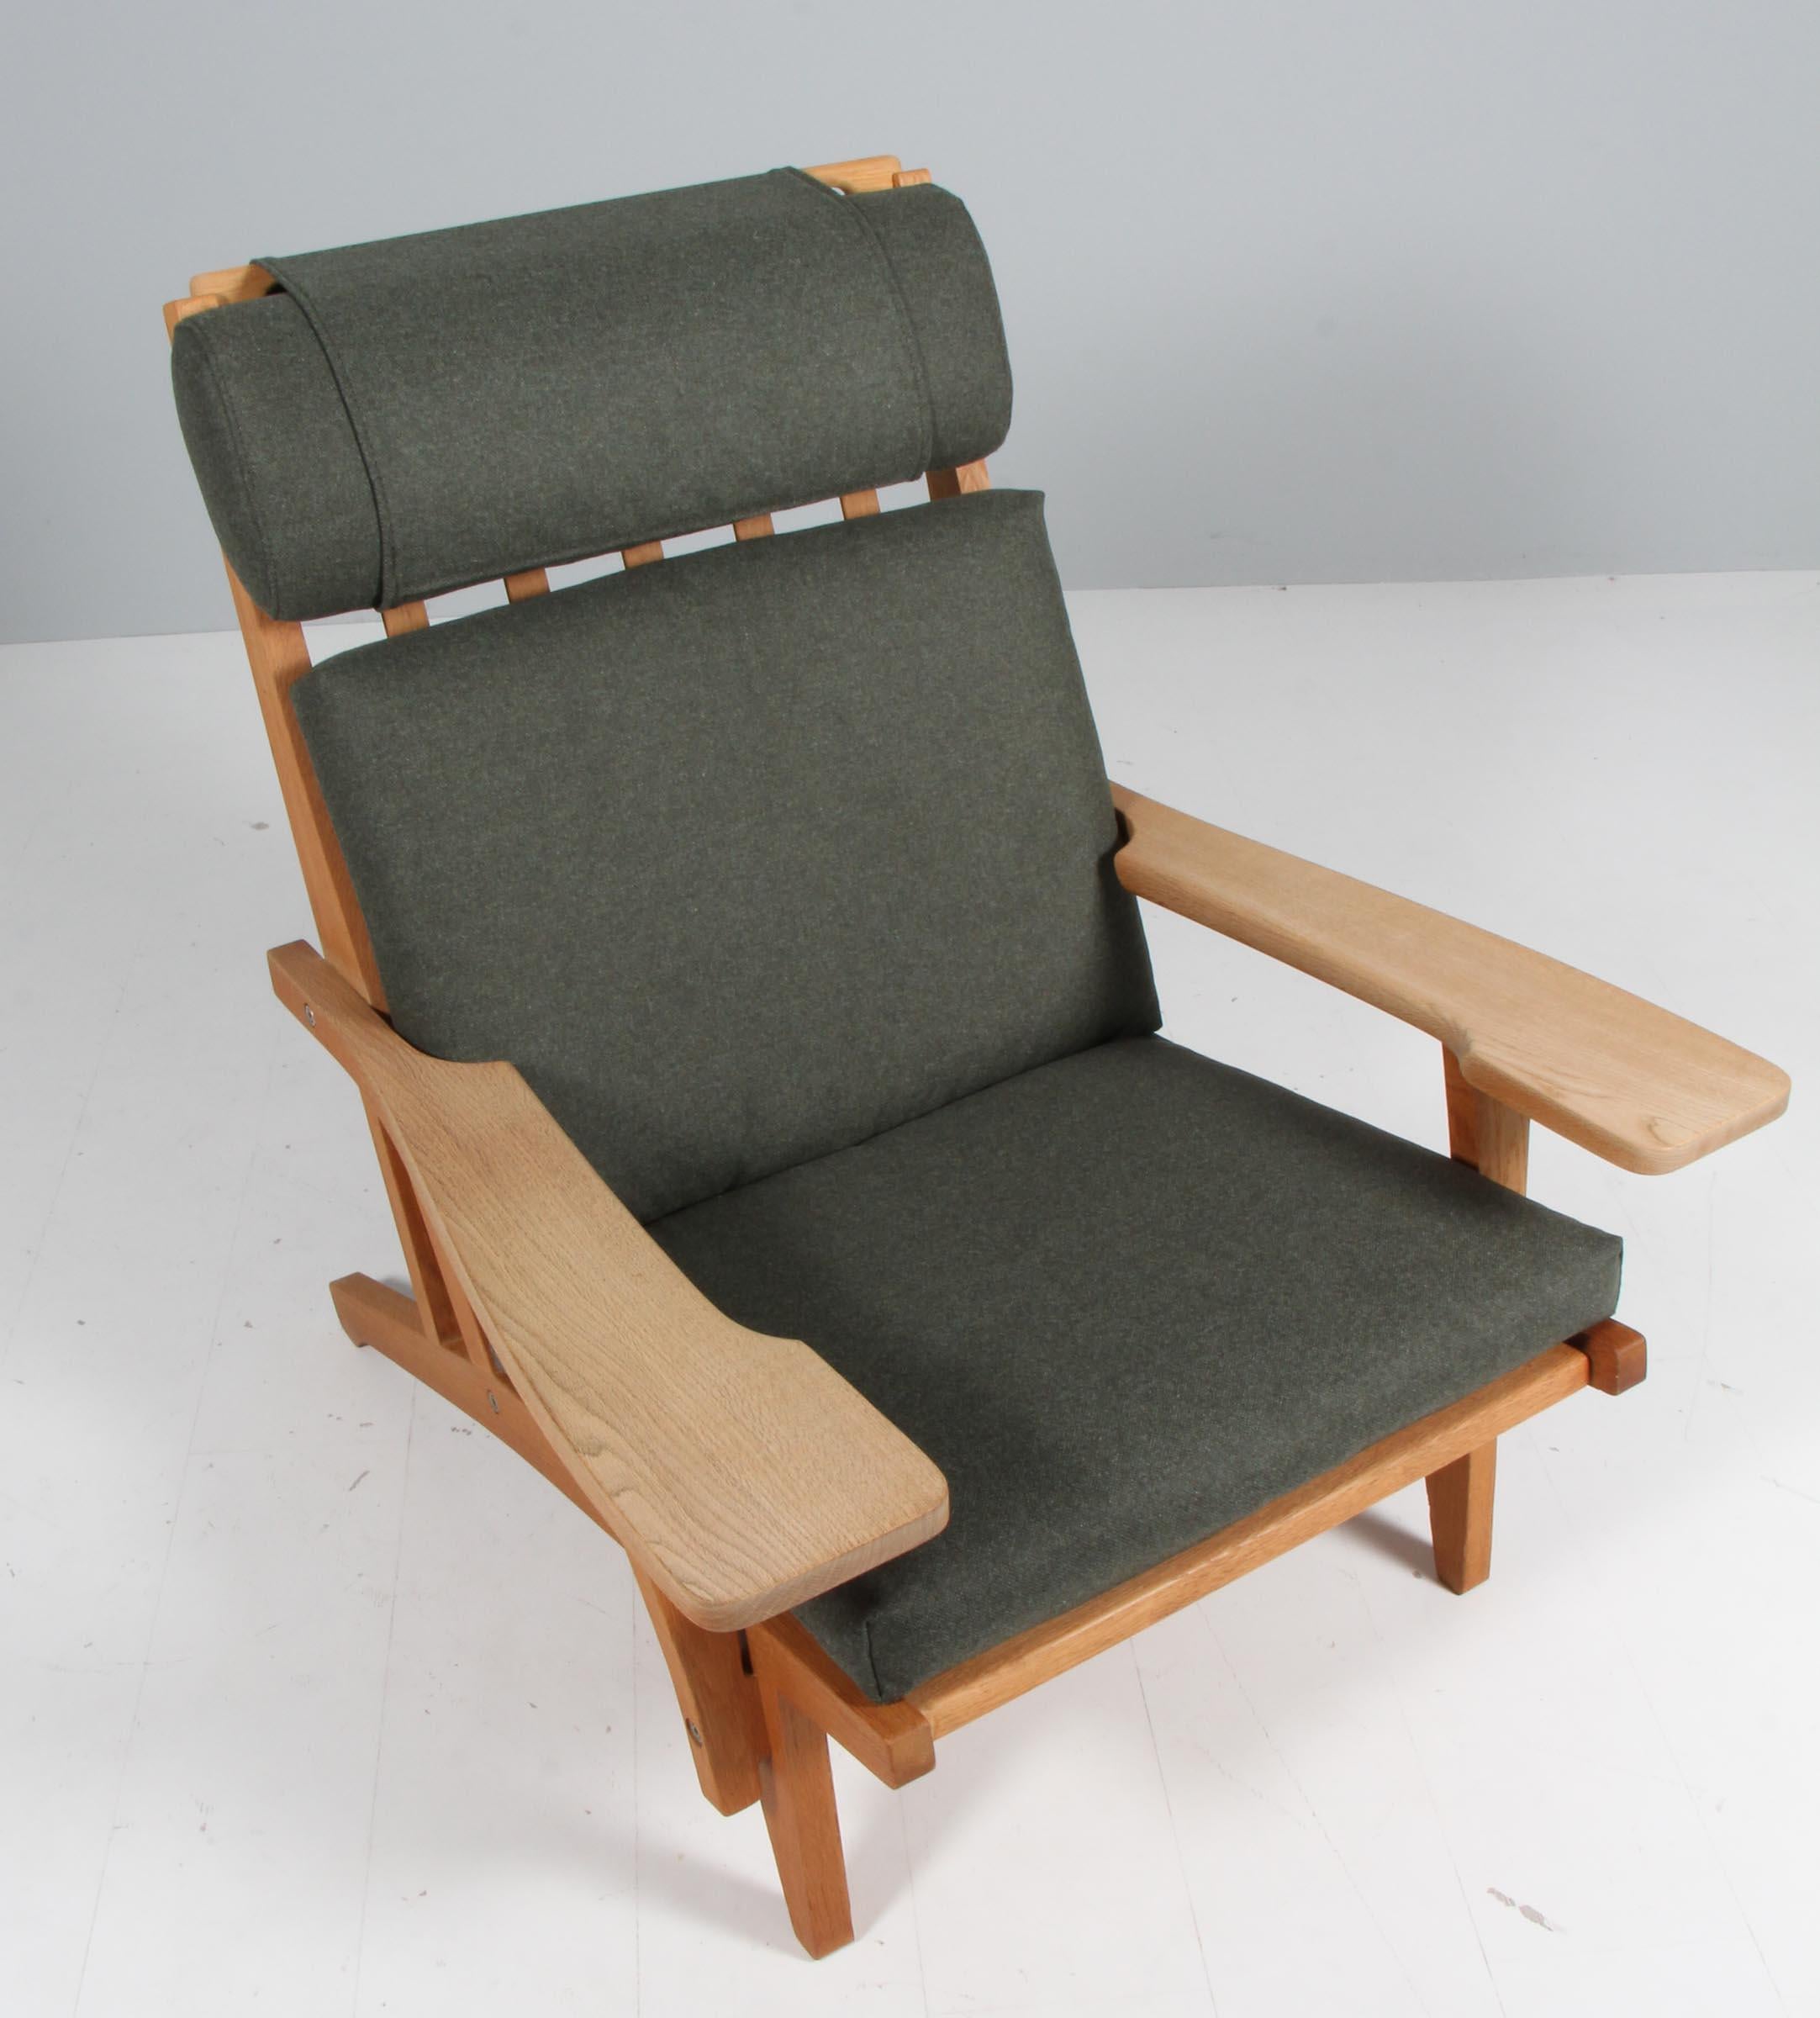 Hans J. Wegner lounge chair with loose cushions new upholstered with green Magrethe wool fabric from Nevotex.

Frame of oak. With armrests.

Model GE-375, made by GETAMA.